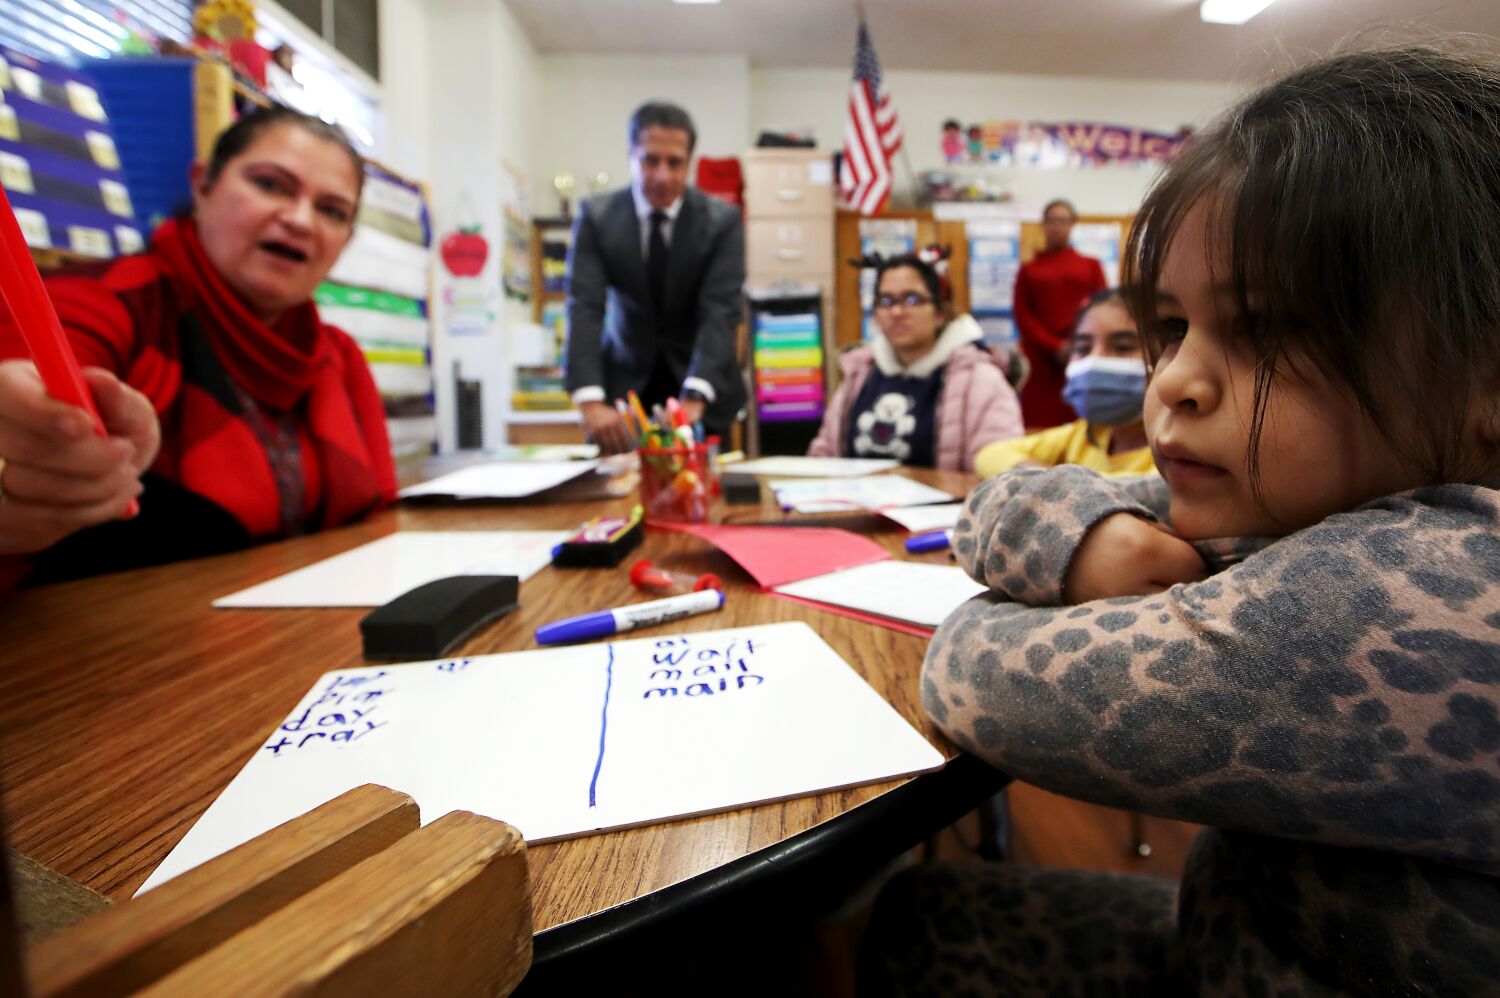 At $611 a day per student, some question if L.A. schools' extra learning days are worth it